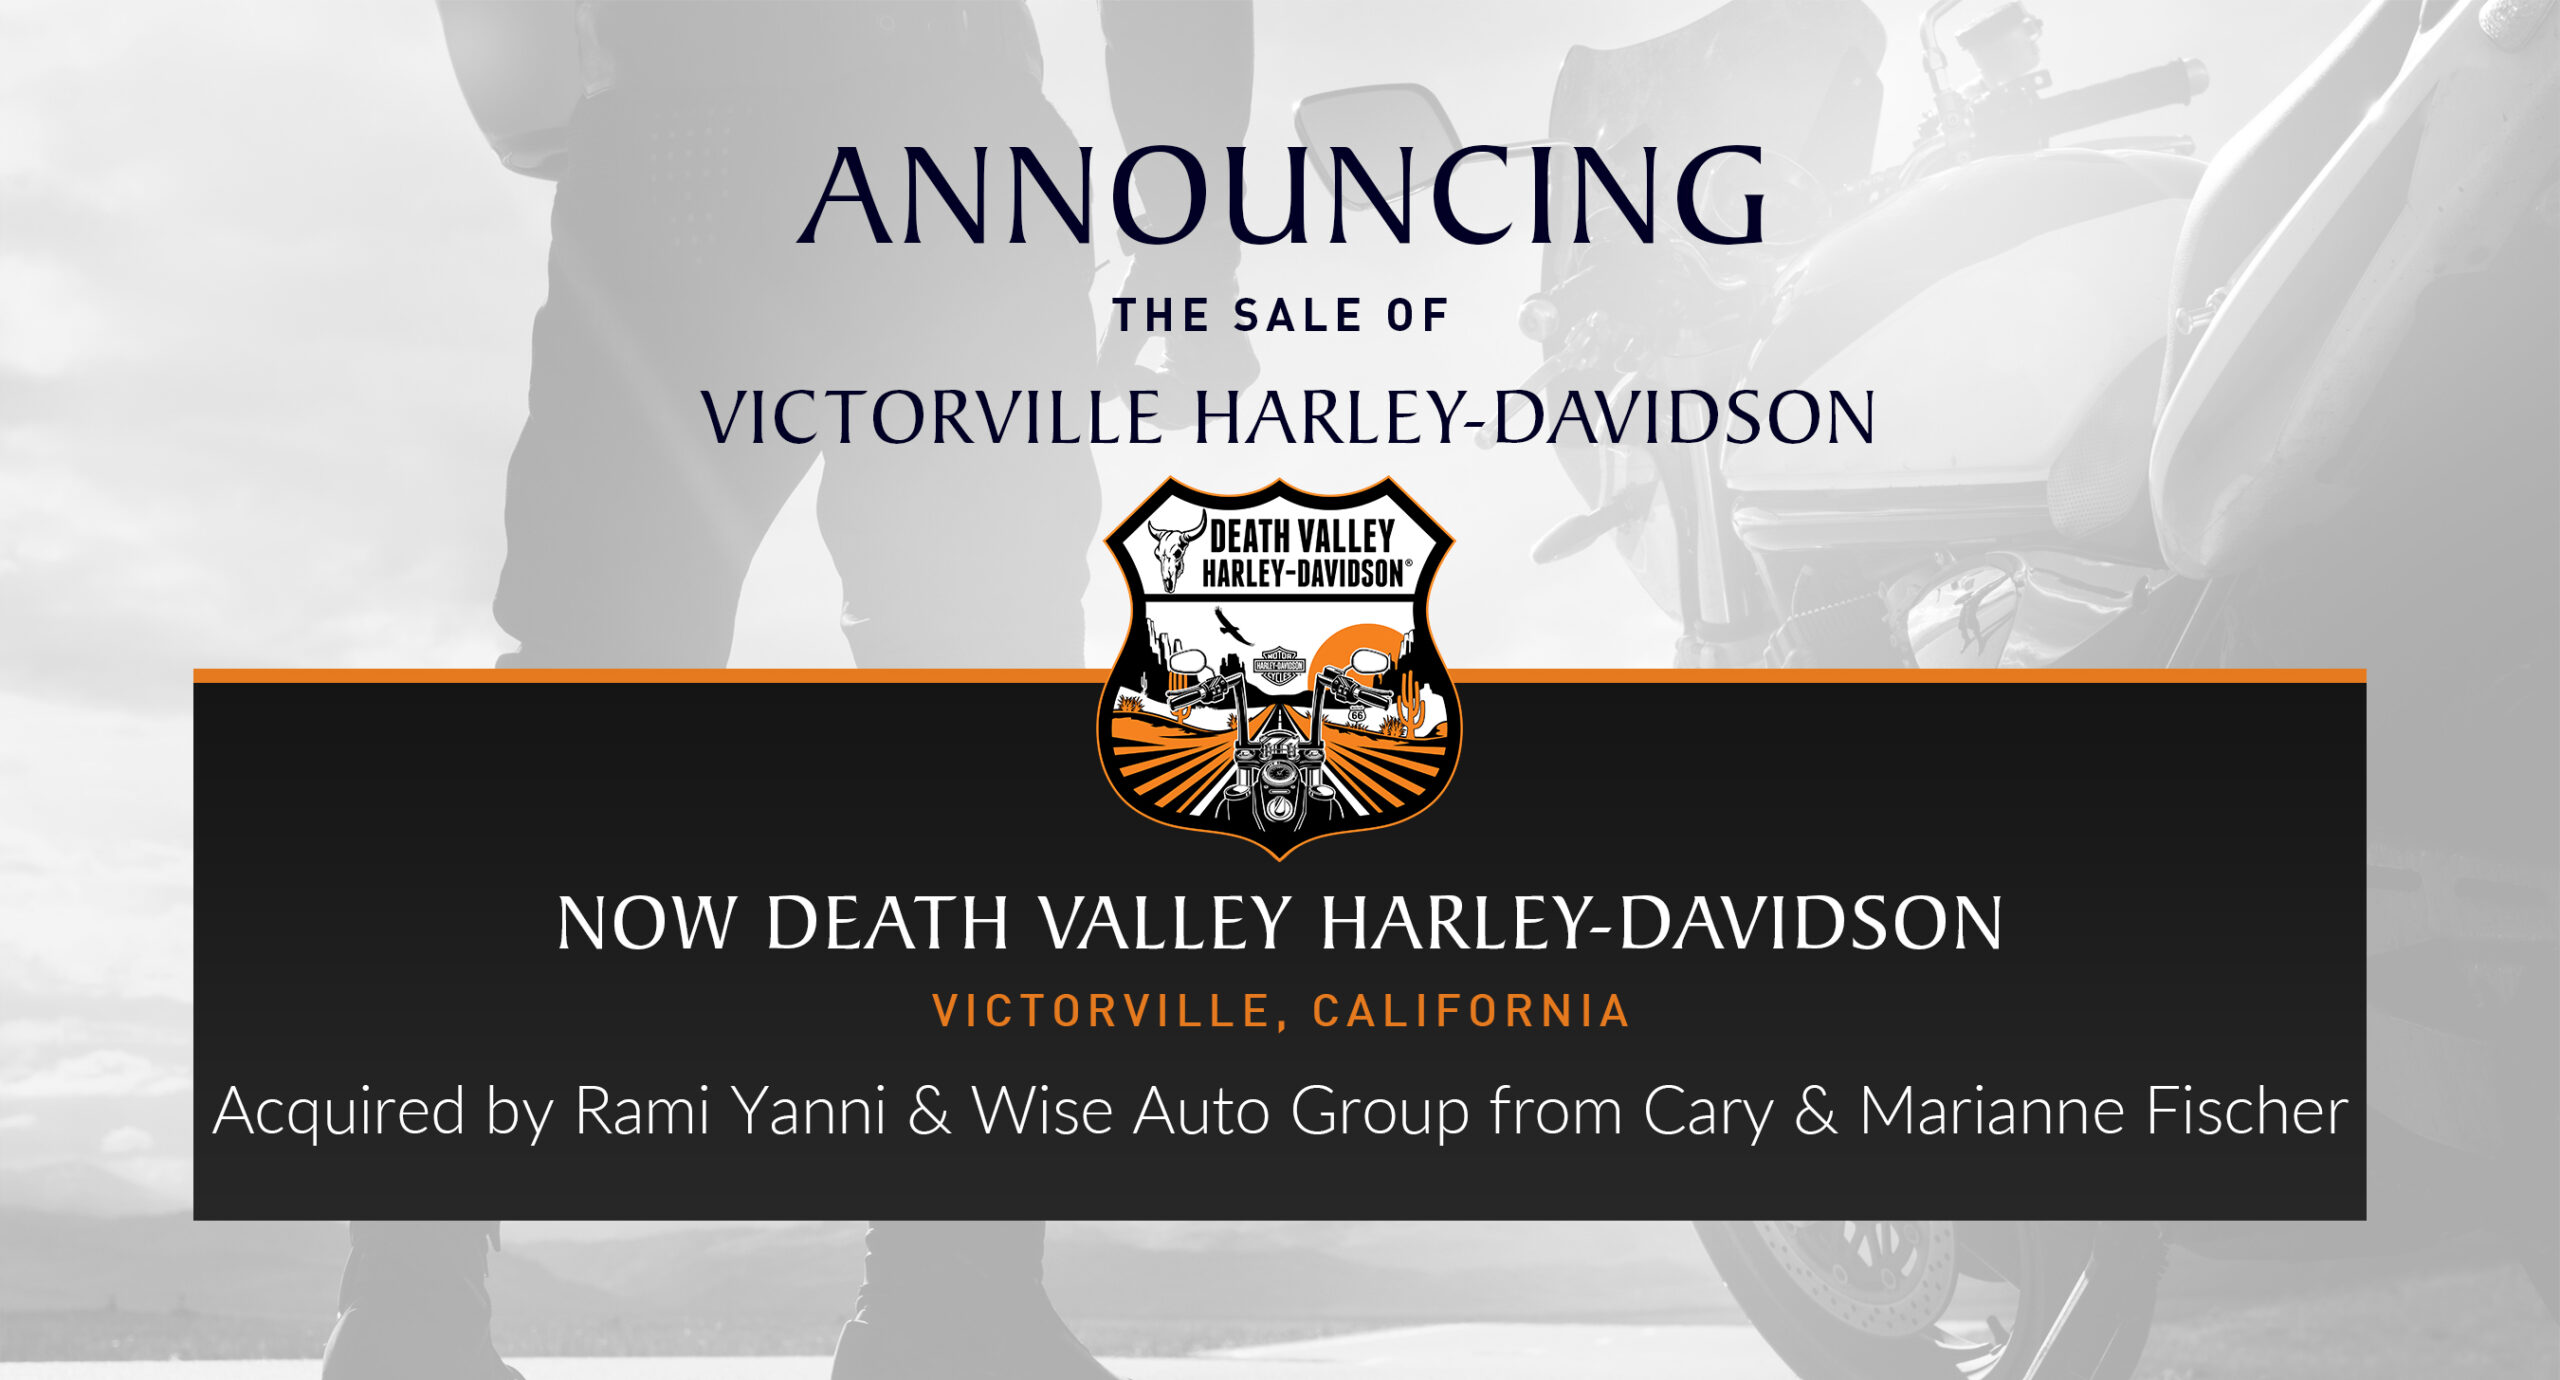 Wise Auto Group Acquires Victorville Harley Davidson In California From Cary Marianne Fischer Performance Brokerage Services